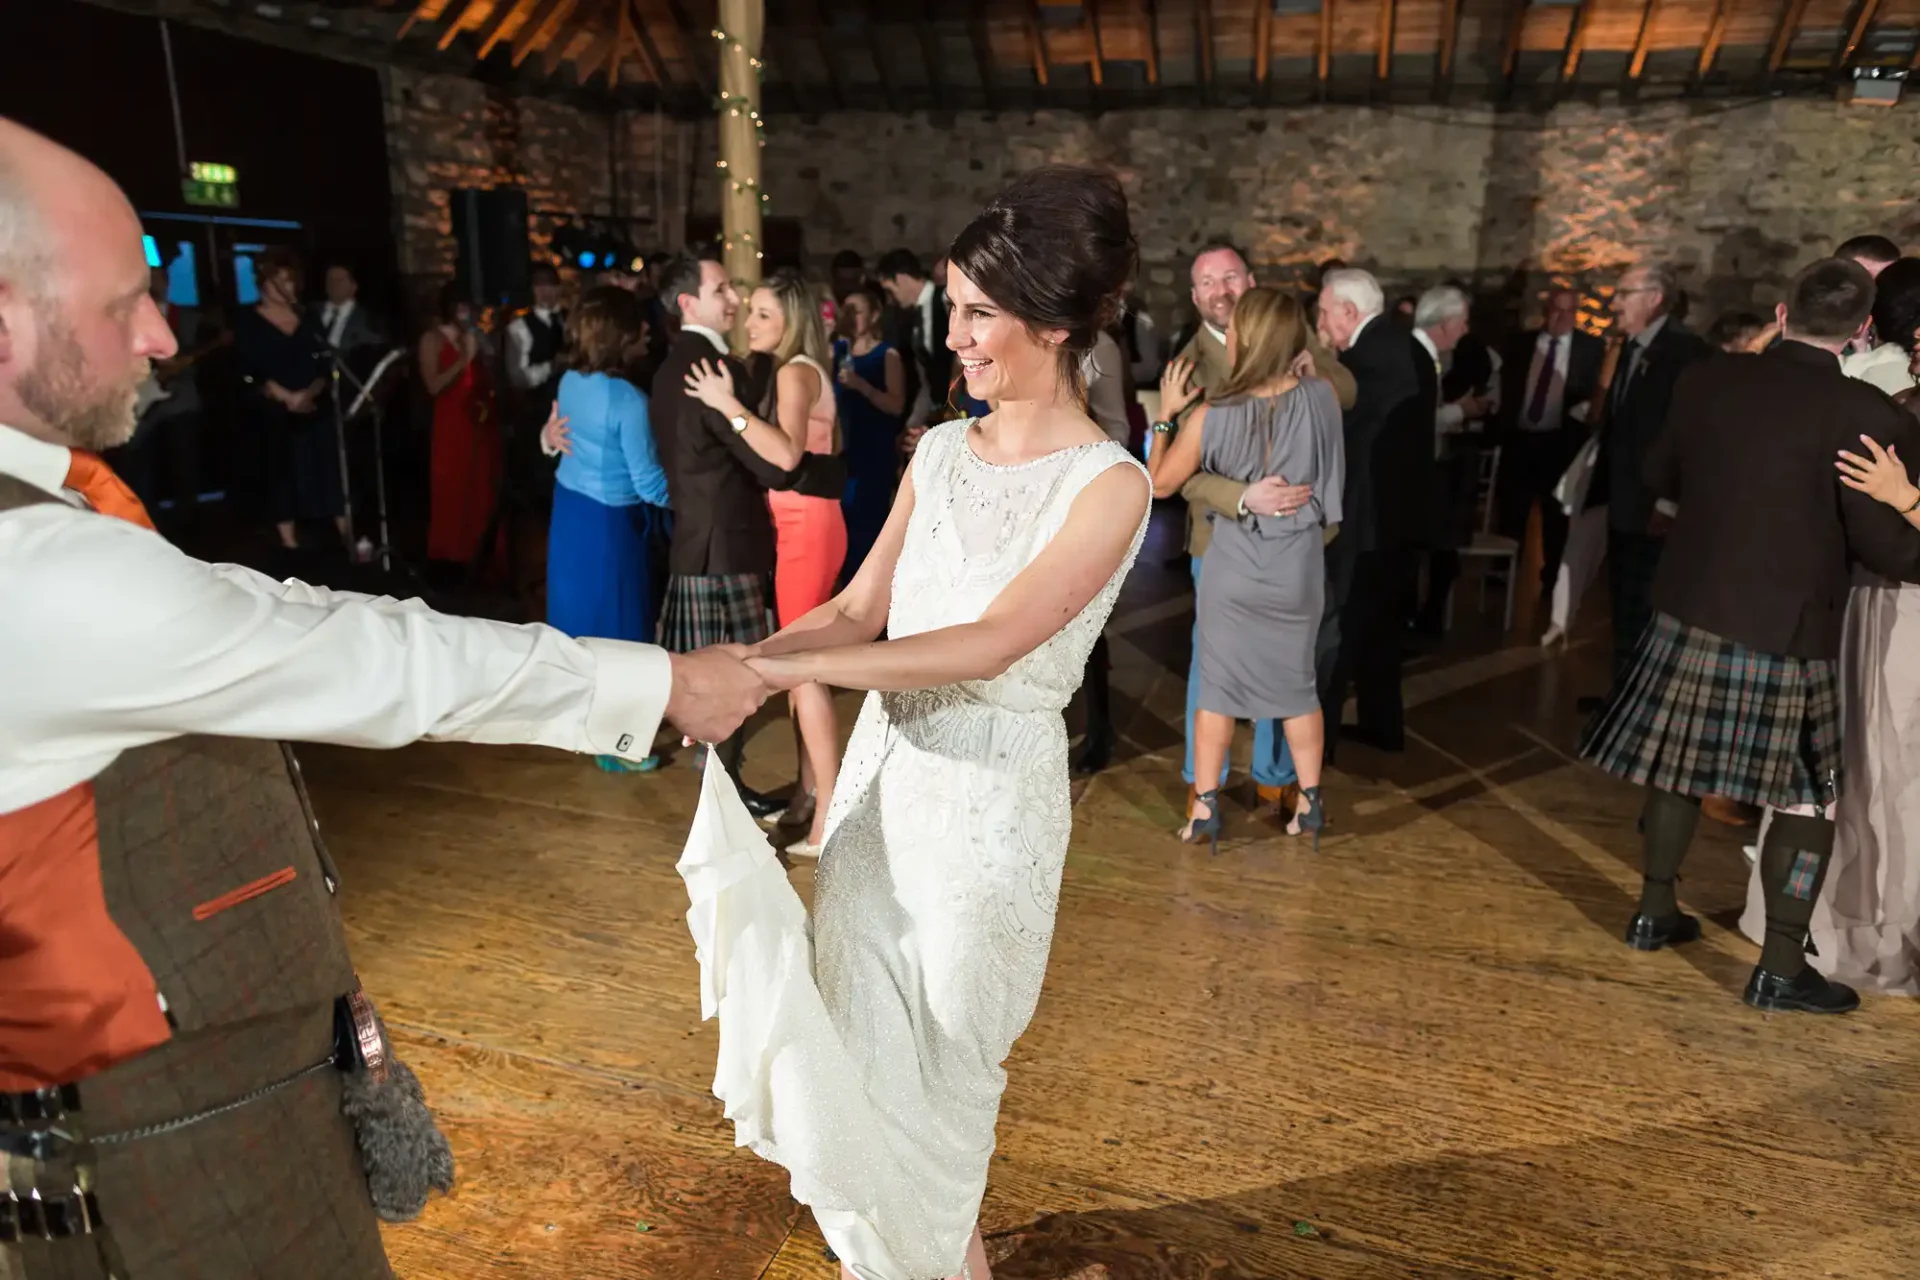 A woman in a white dress dances joyfully with a man in traditional scottish attire at a lively indoor event.